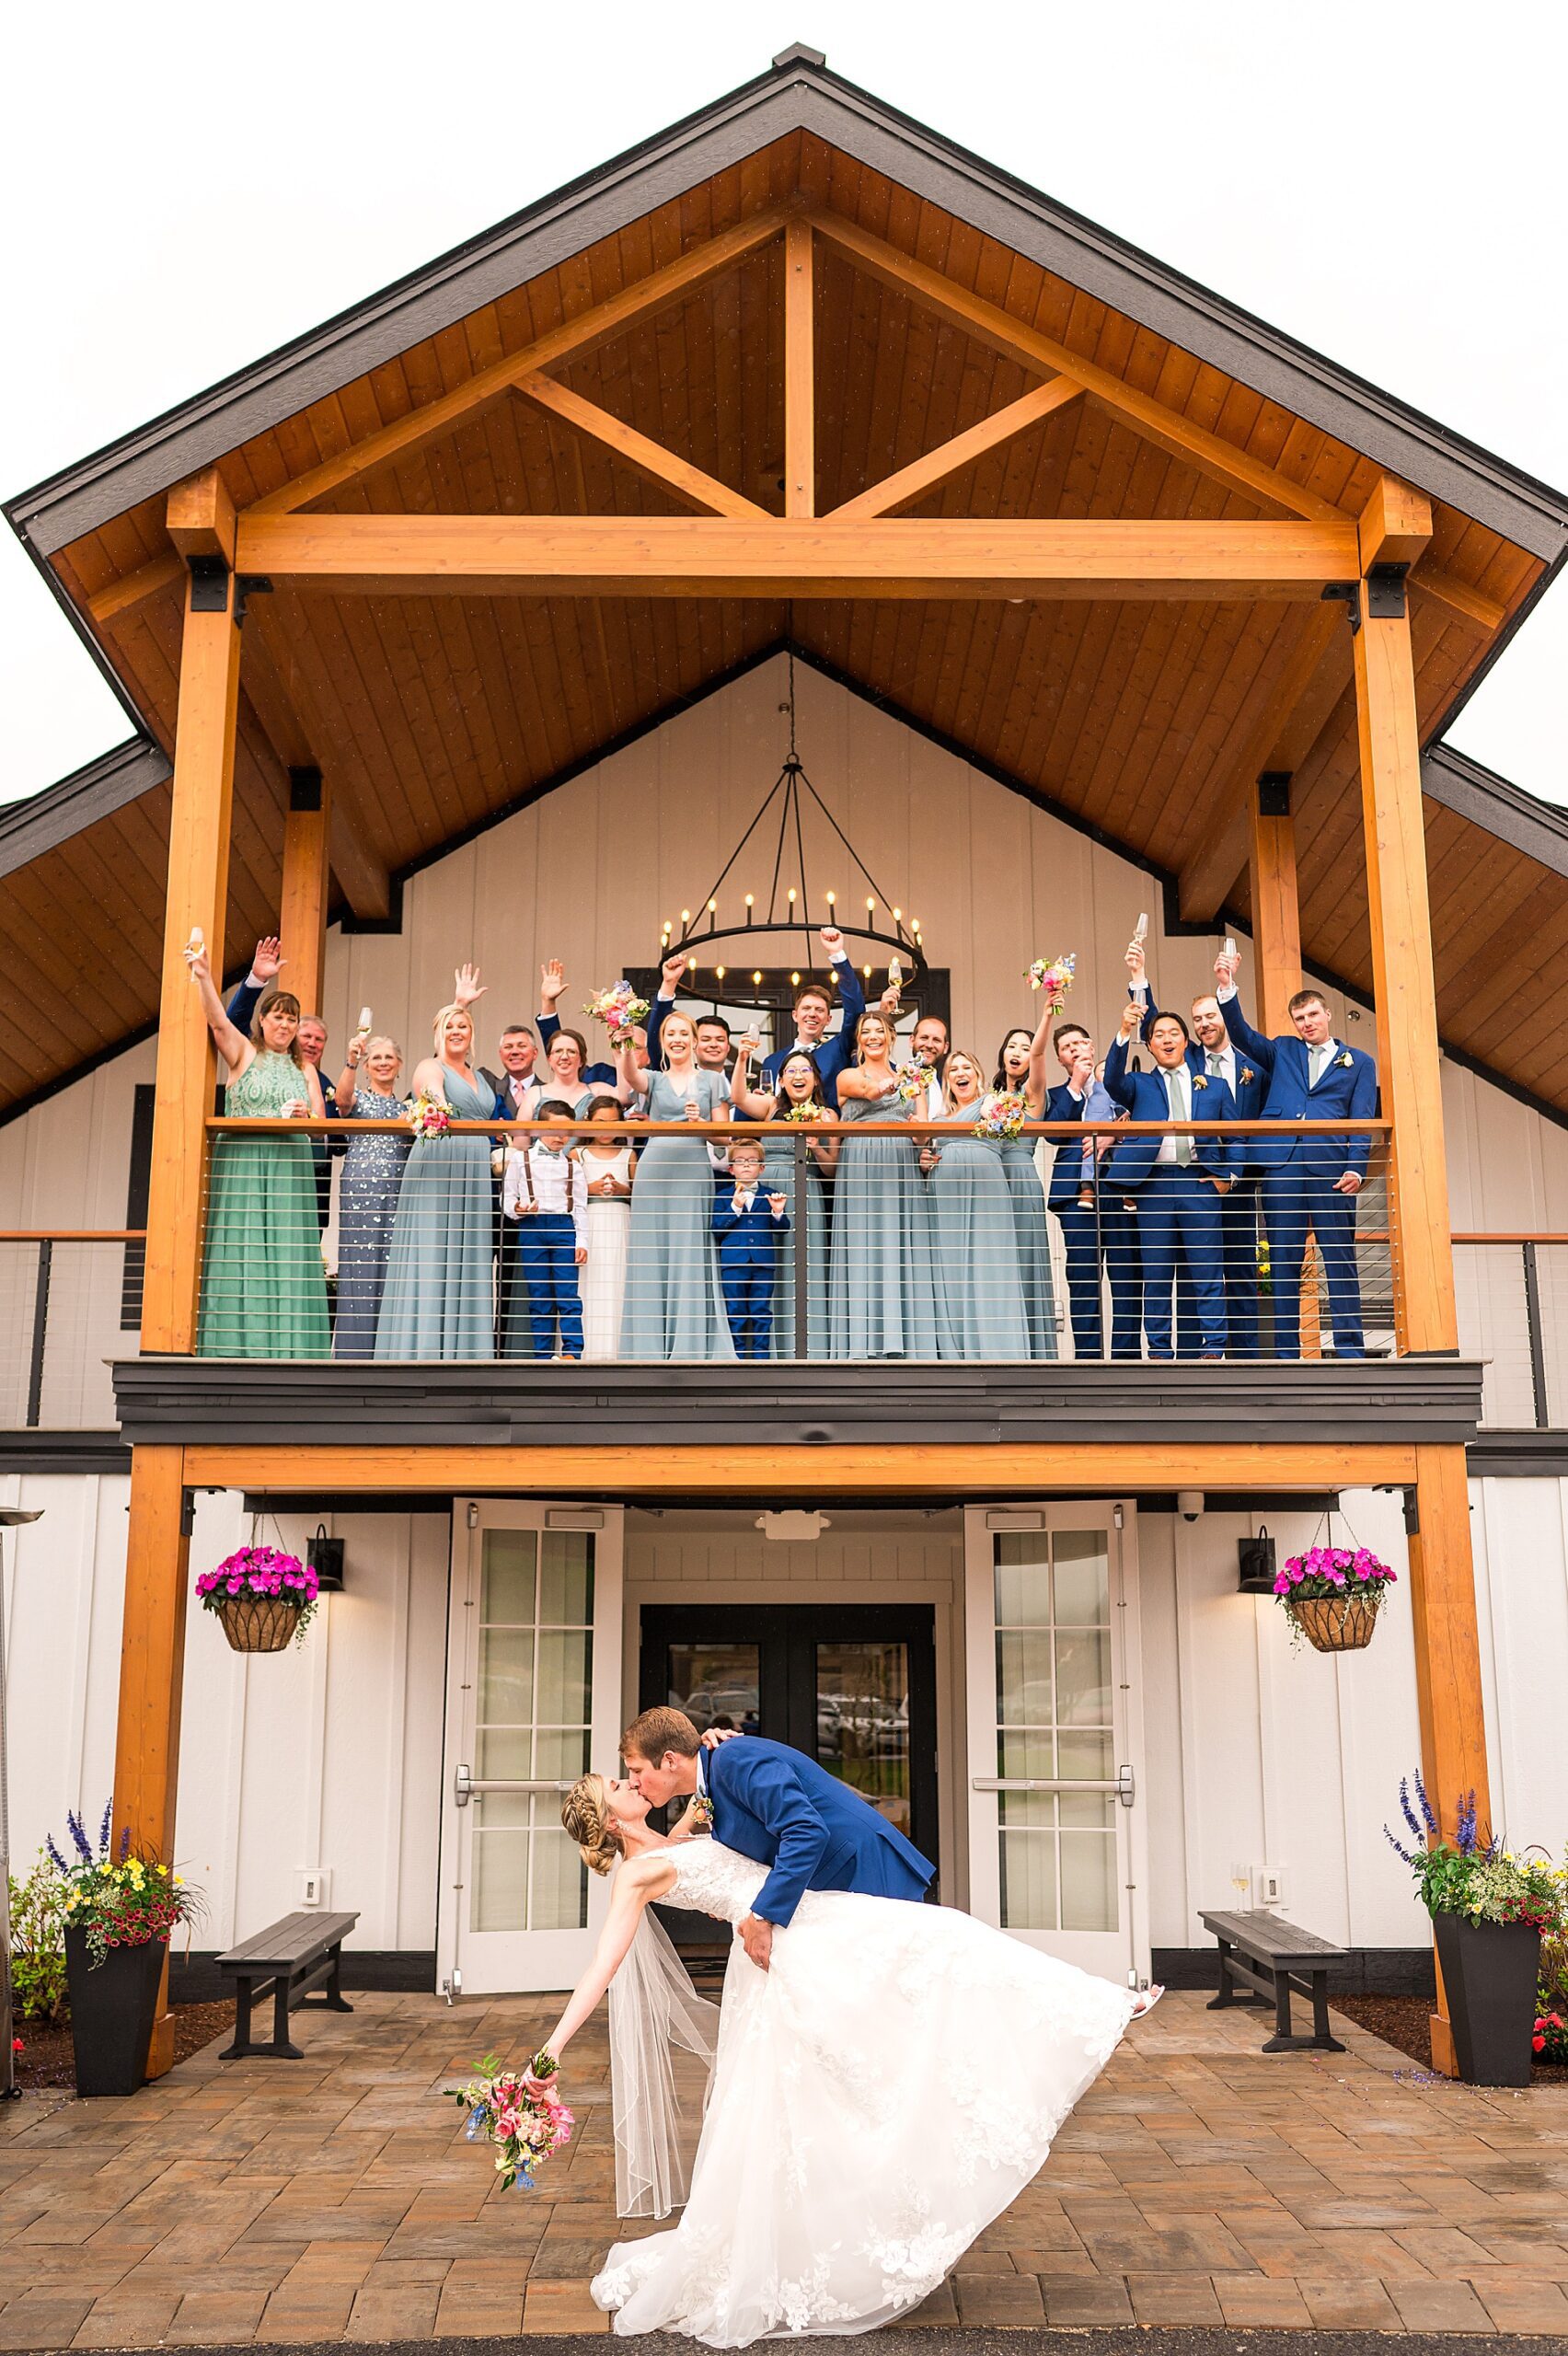 newlyweds kiss outside as wedding party cheers on balcony of lakehouse from  Summer Wedding at Owl's Nest Resort  